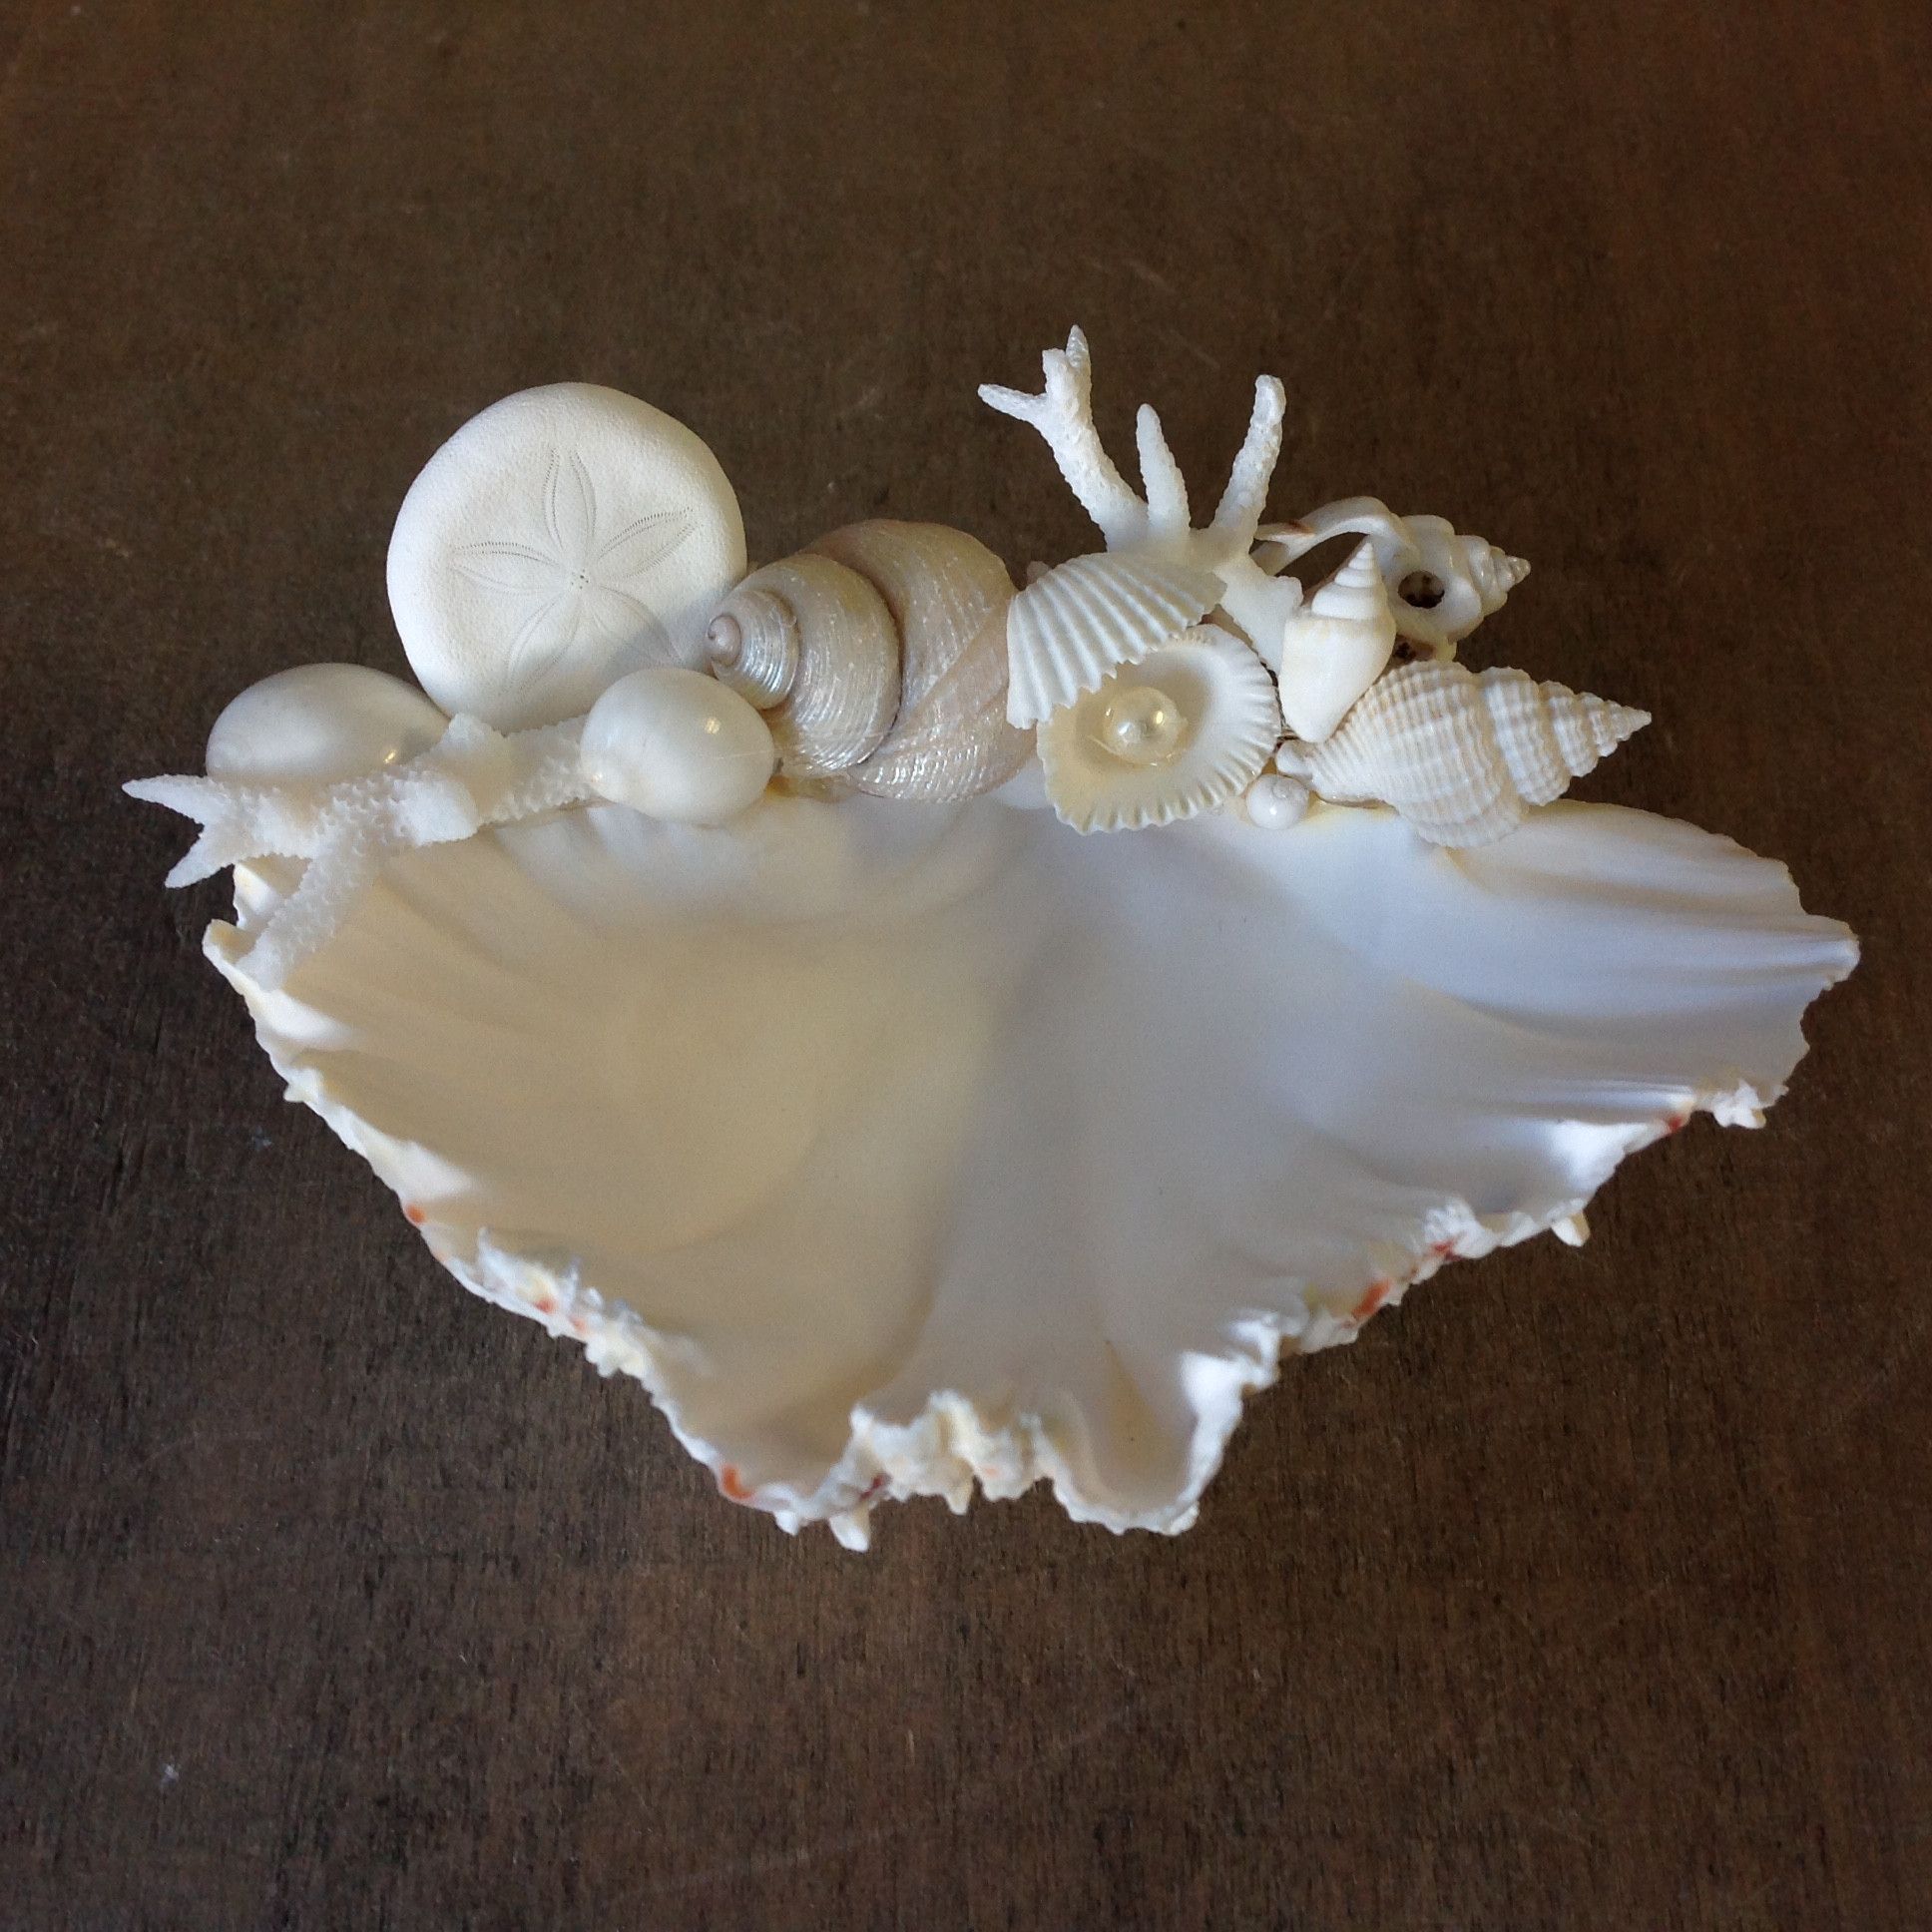 Seashell Ring Dish | Soap dishes, Clams and Dishes